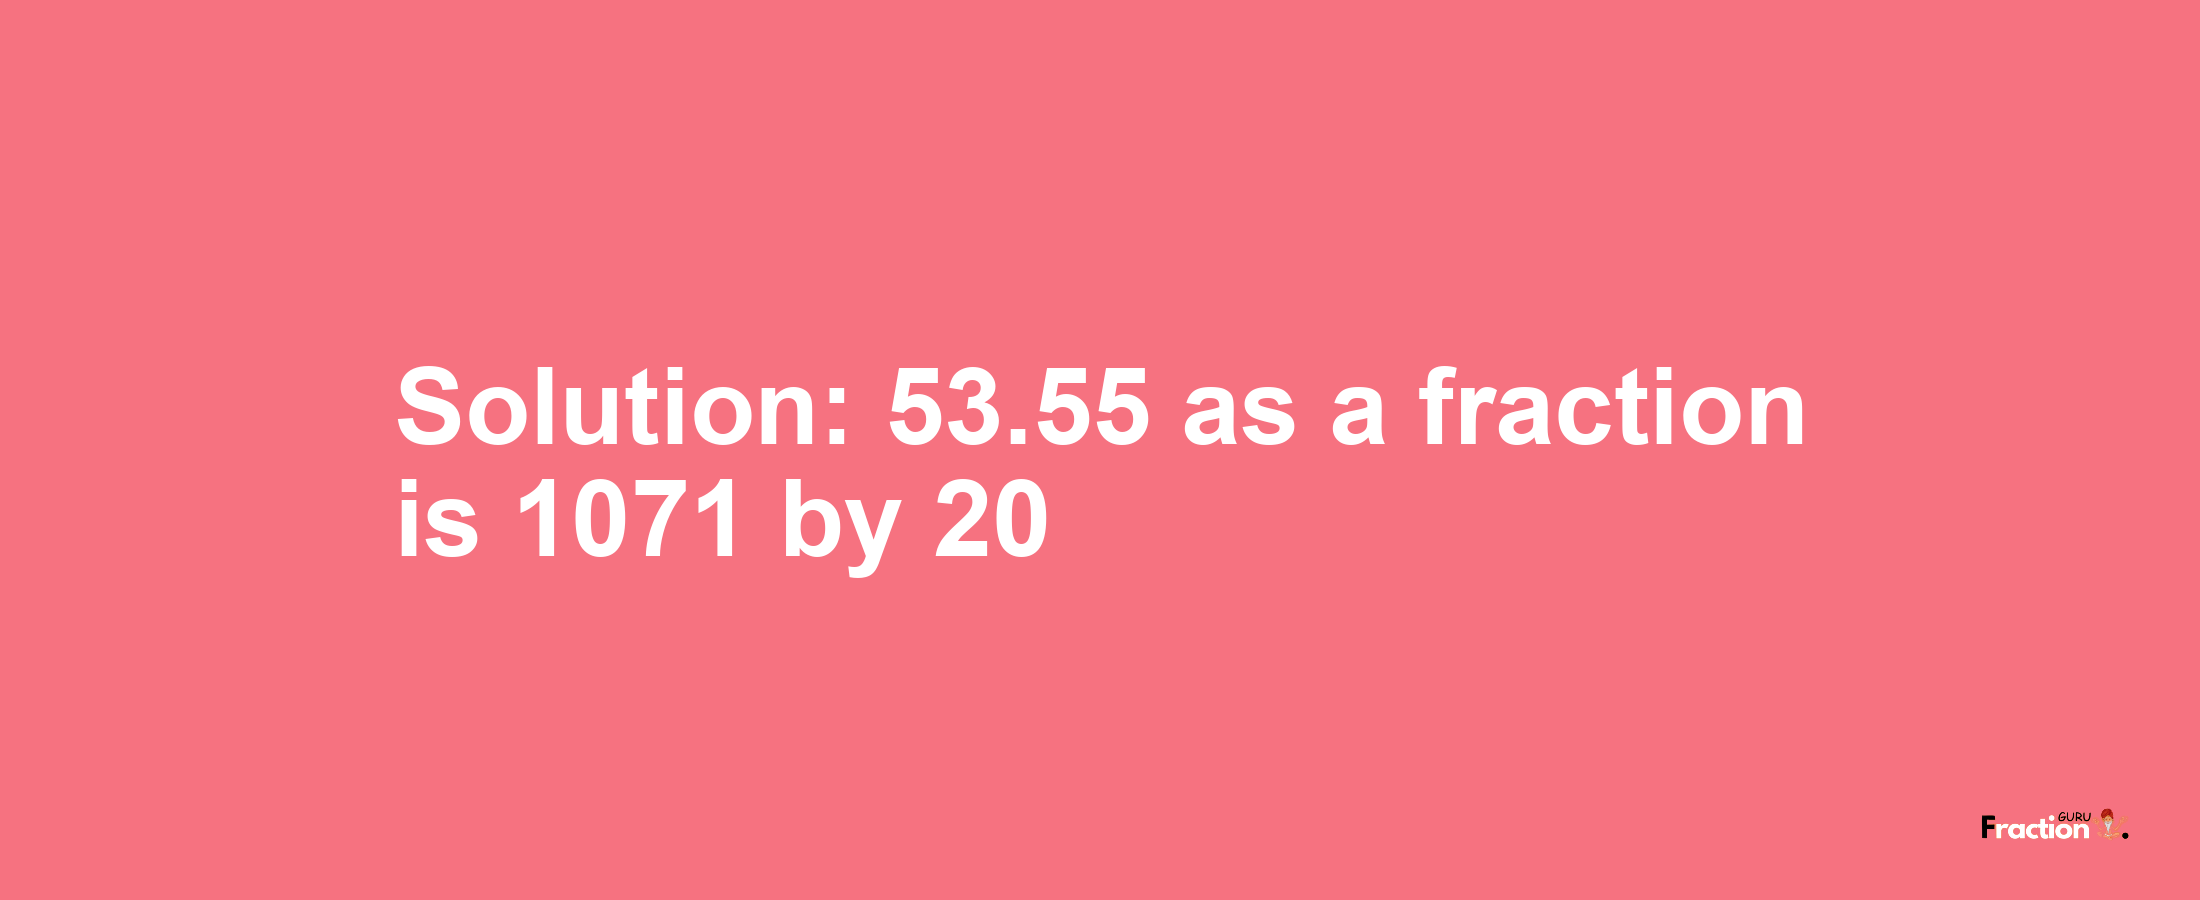 Solution:53.55 as a fraction is 1071/20